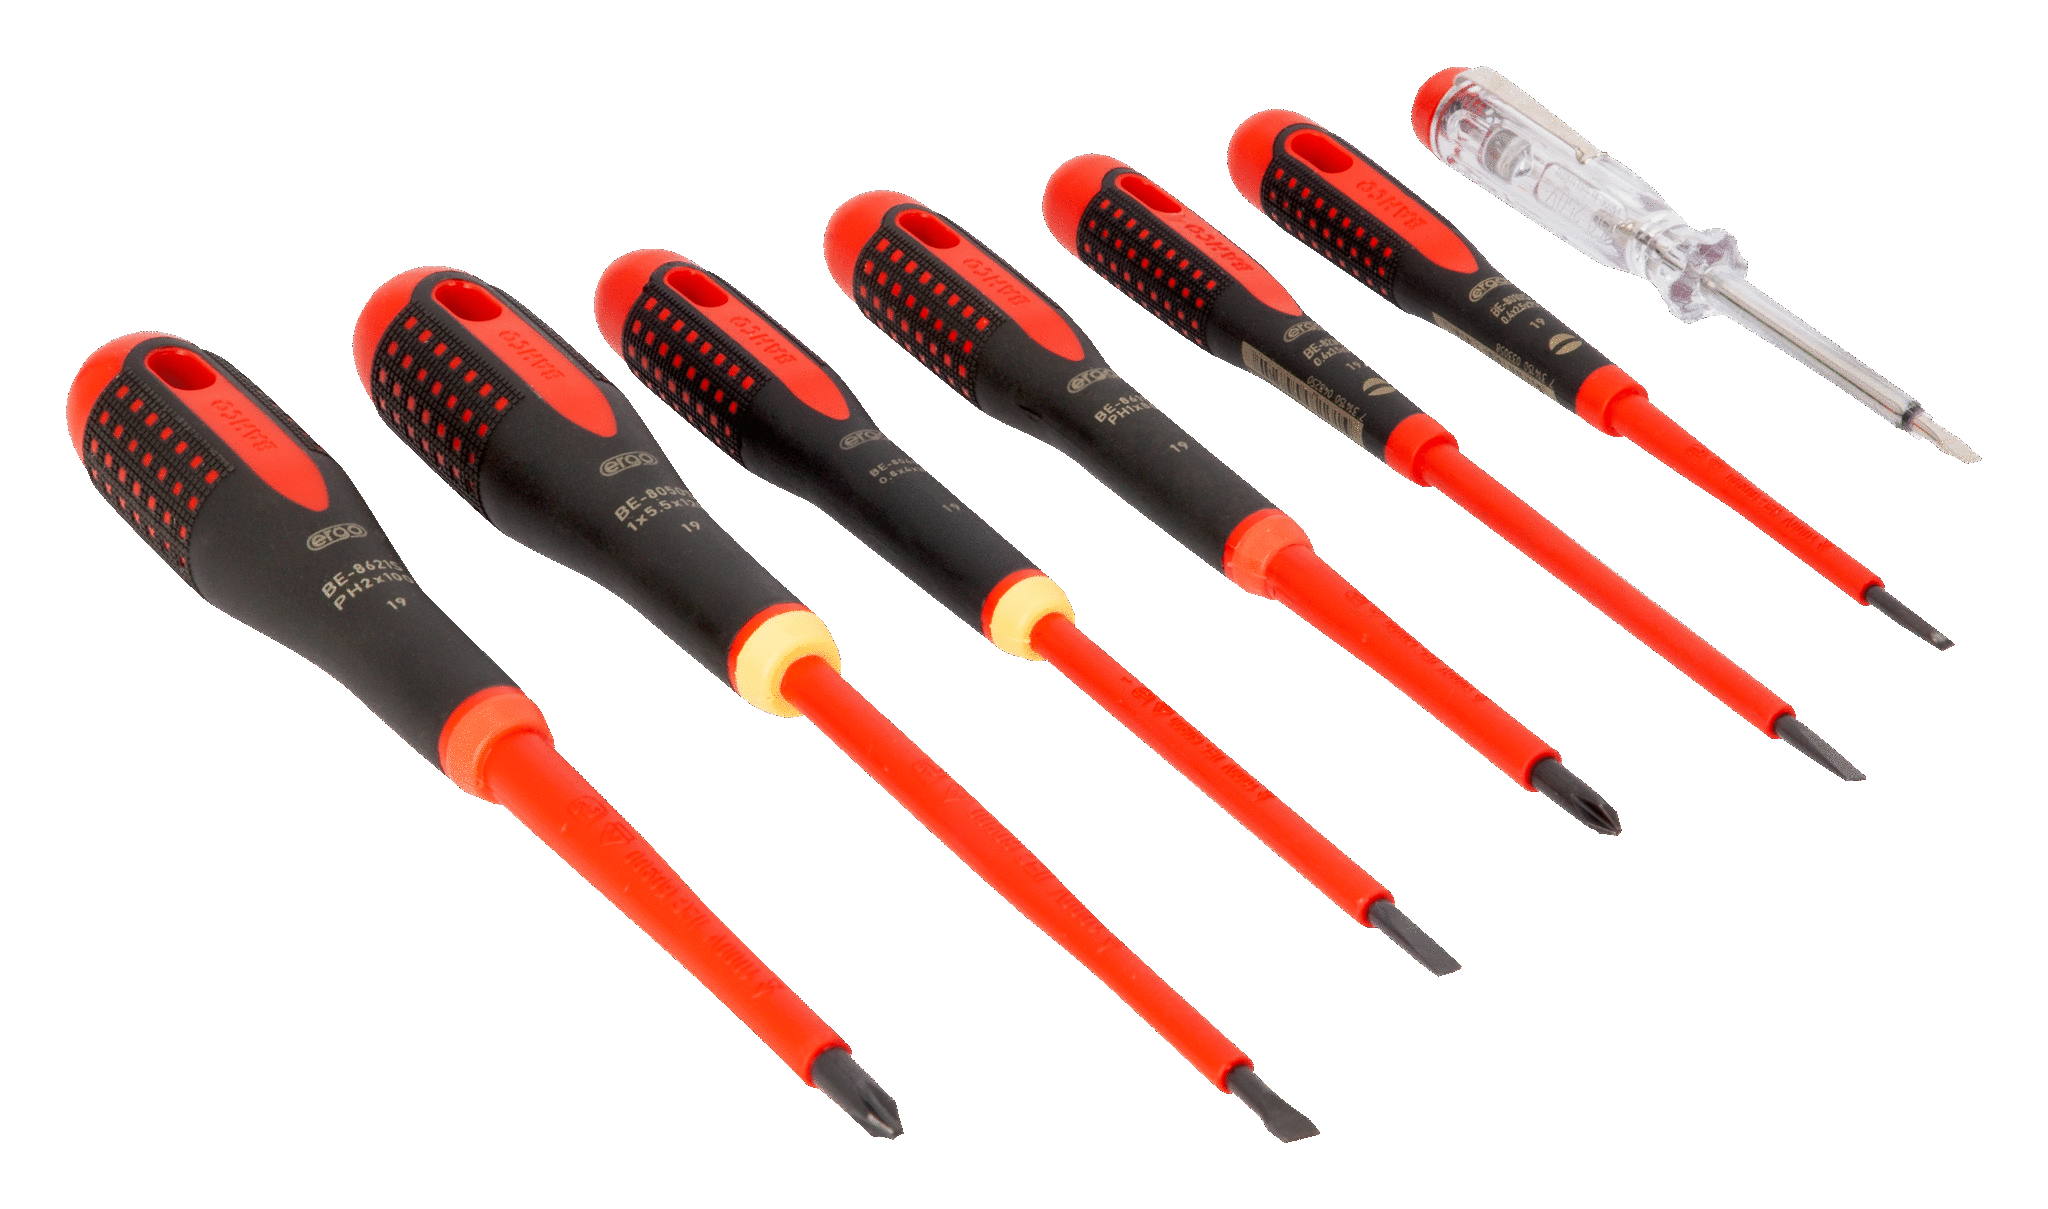 ERGO™ VDE Insulated Slotted and Phillips Screwdriver Set with 3